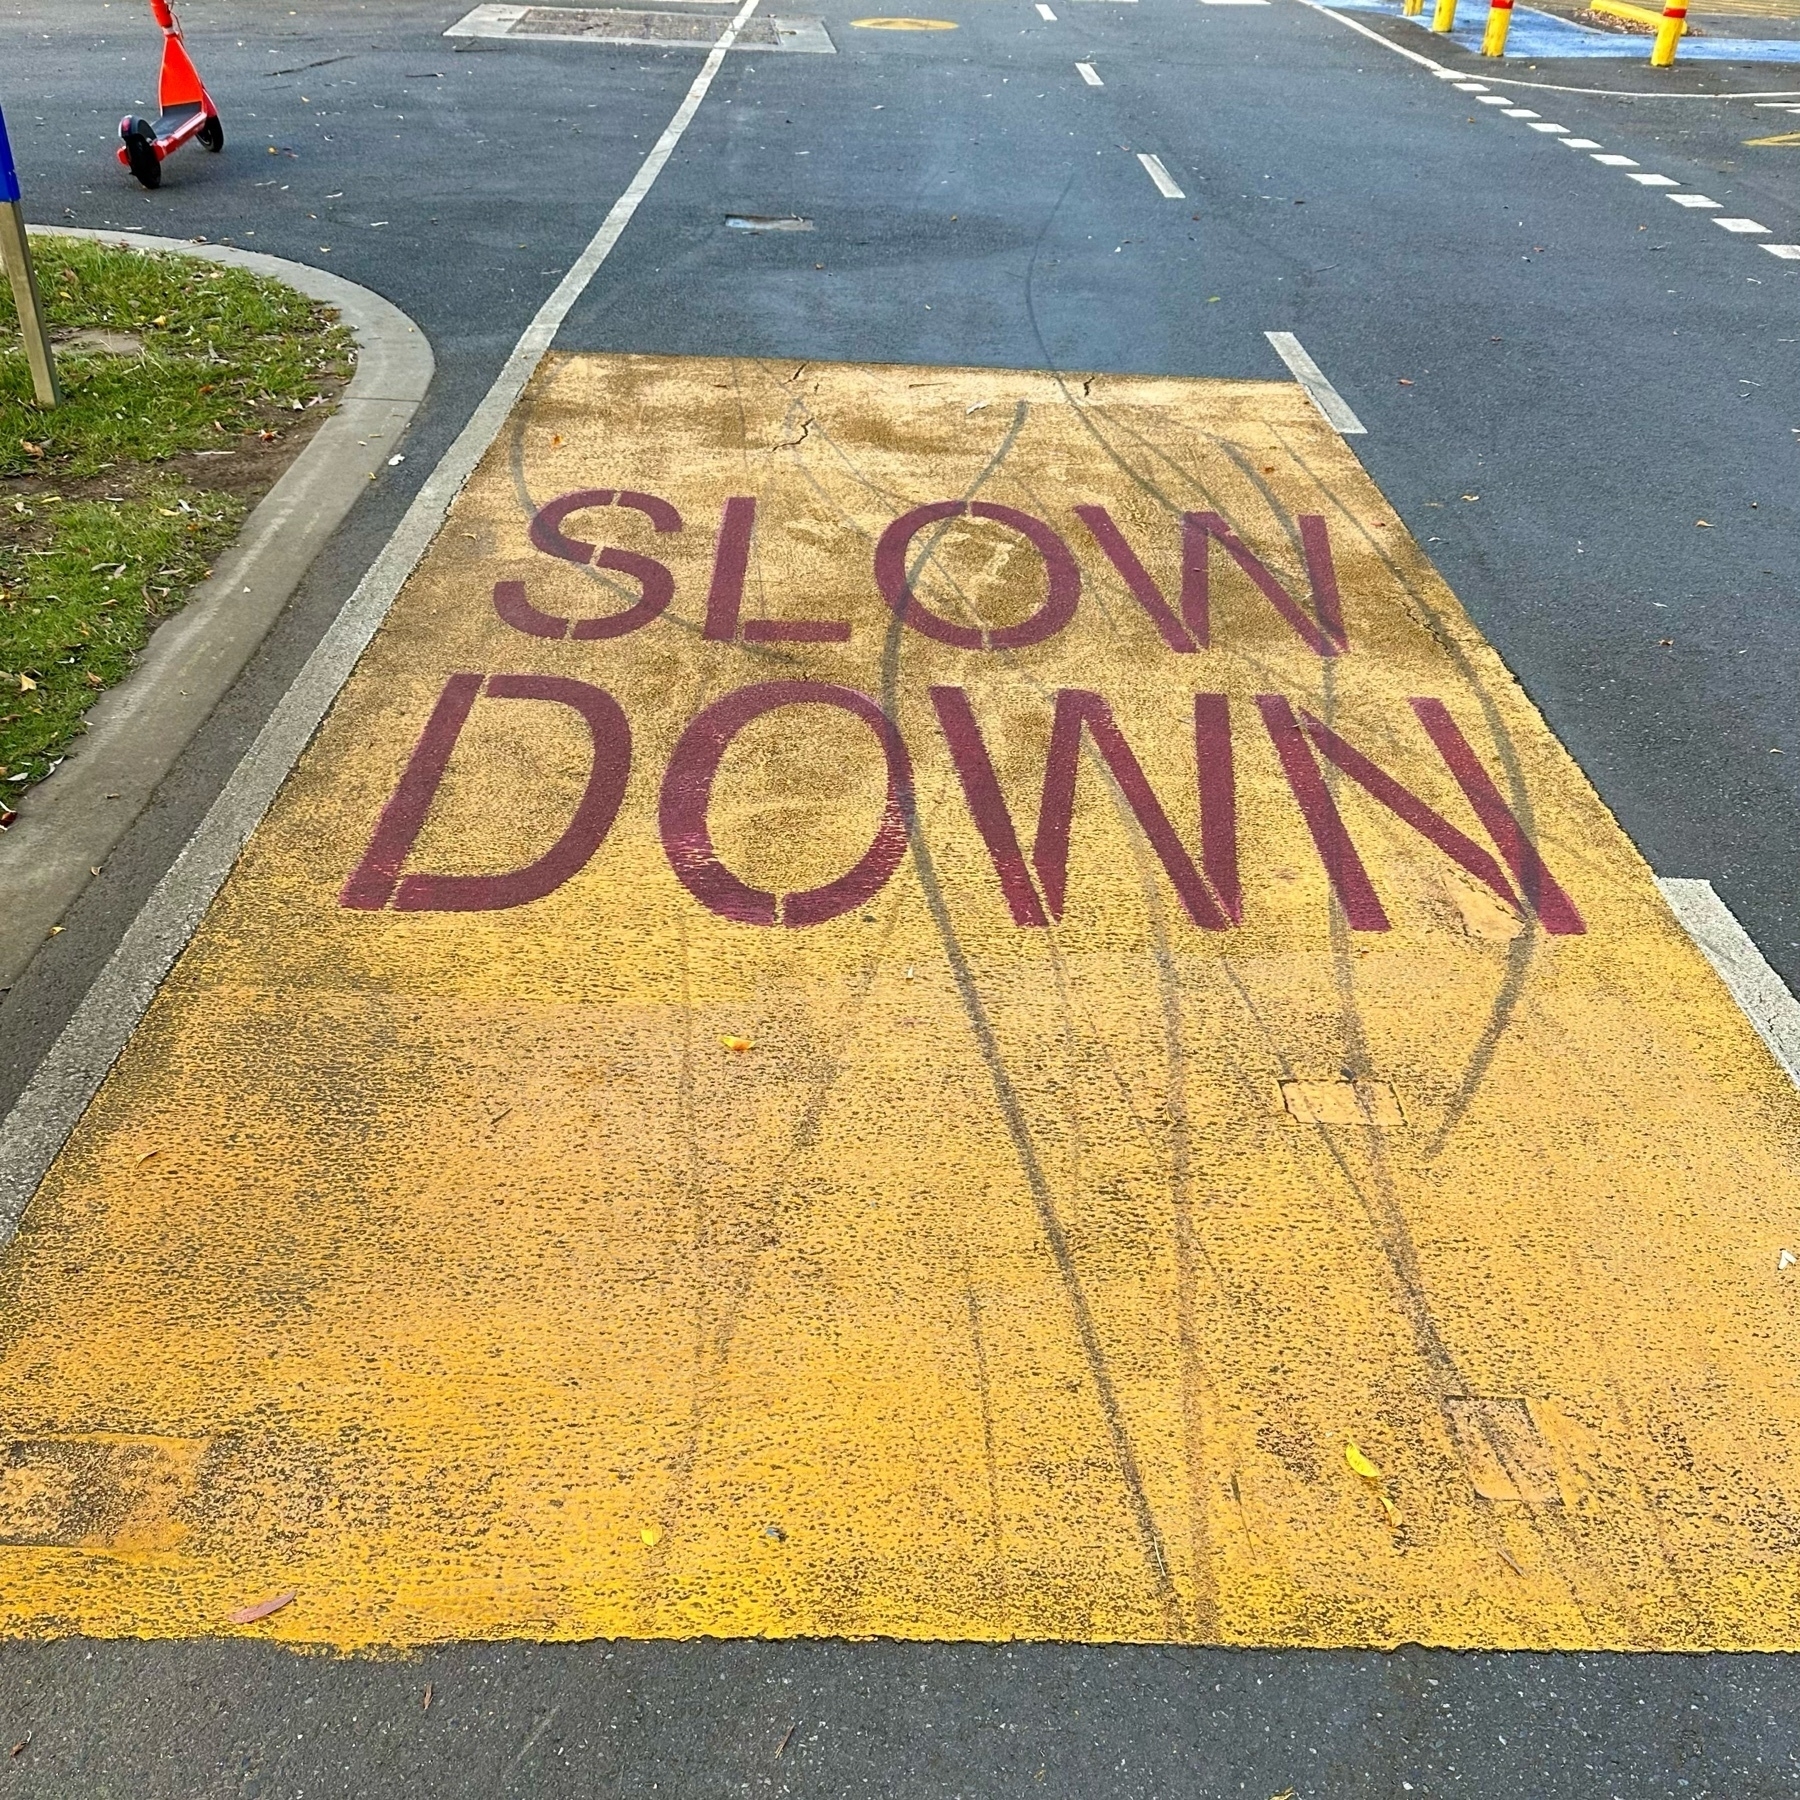 A large yellow rectangular box painted longways on the road. "Slow down" is painted in large red capital letters in the top half.